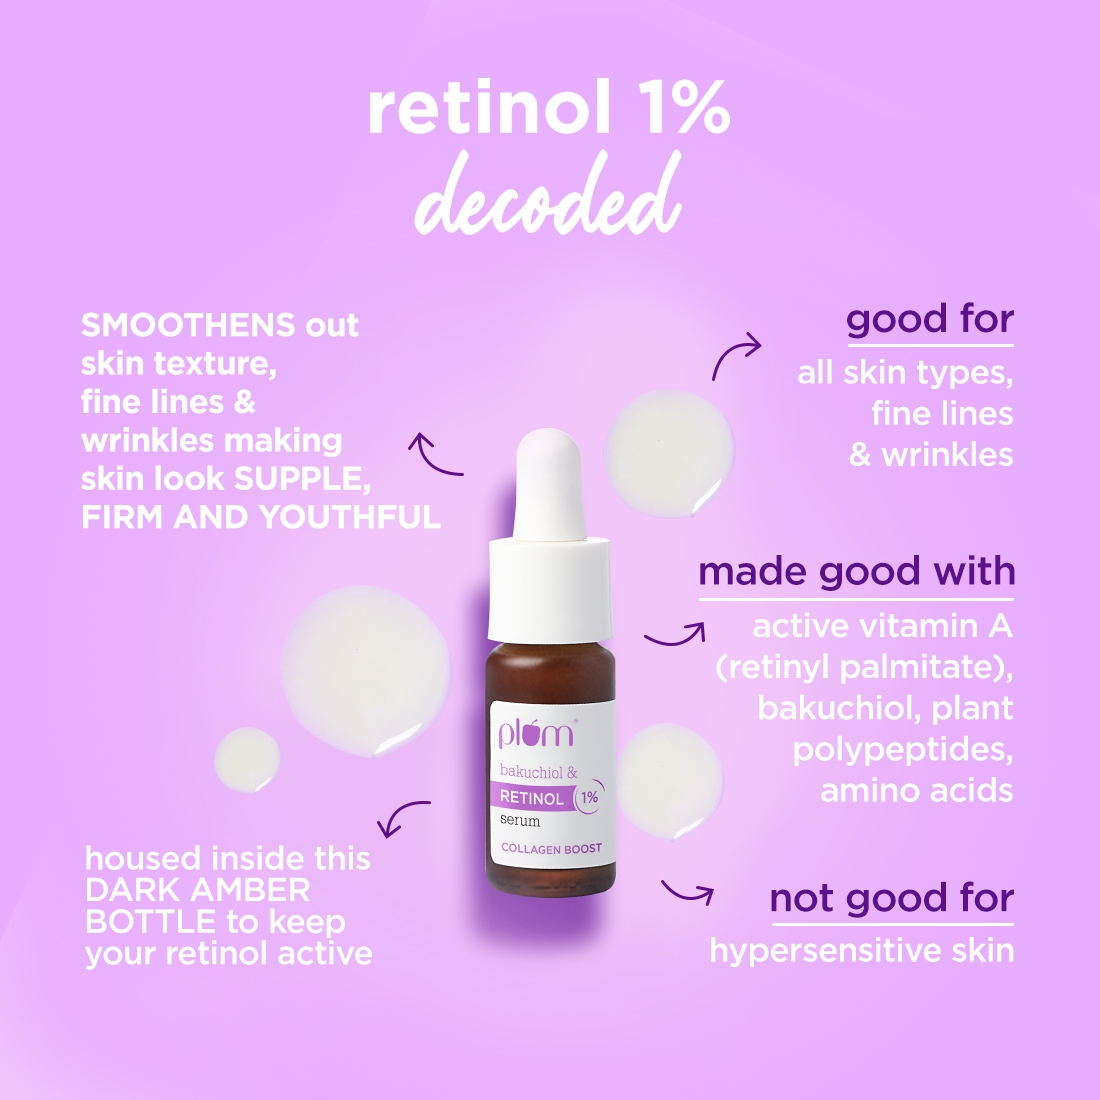 Plum Be Good | Specialist Serums - Starter Pack | Set of 3 Mini Serums | Vitamin C, Hyaluronic & Niacinamide |For Glowing, Hydrated, Clear Skin | All Skin Types | Fragrance-Free | 100% Vegan 7